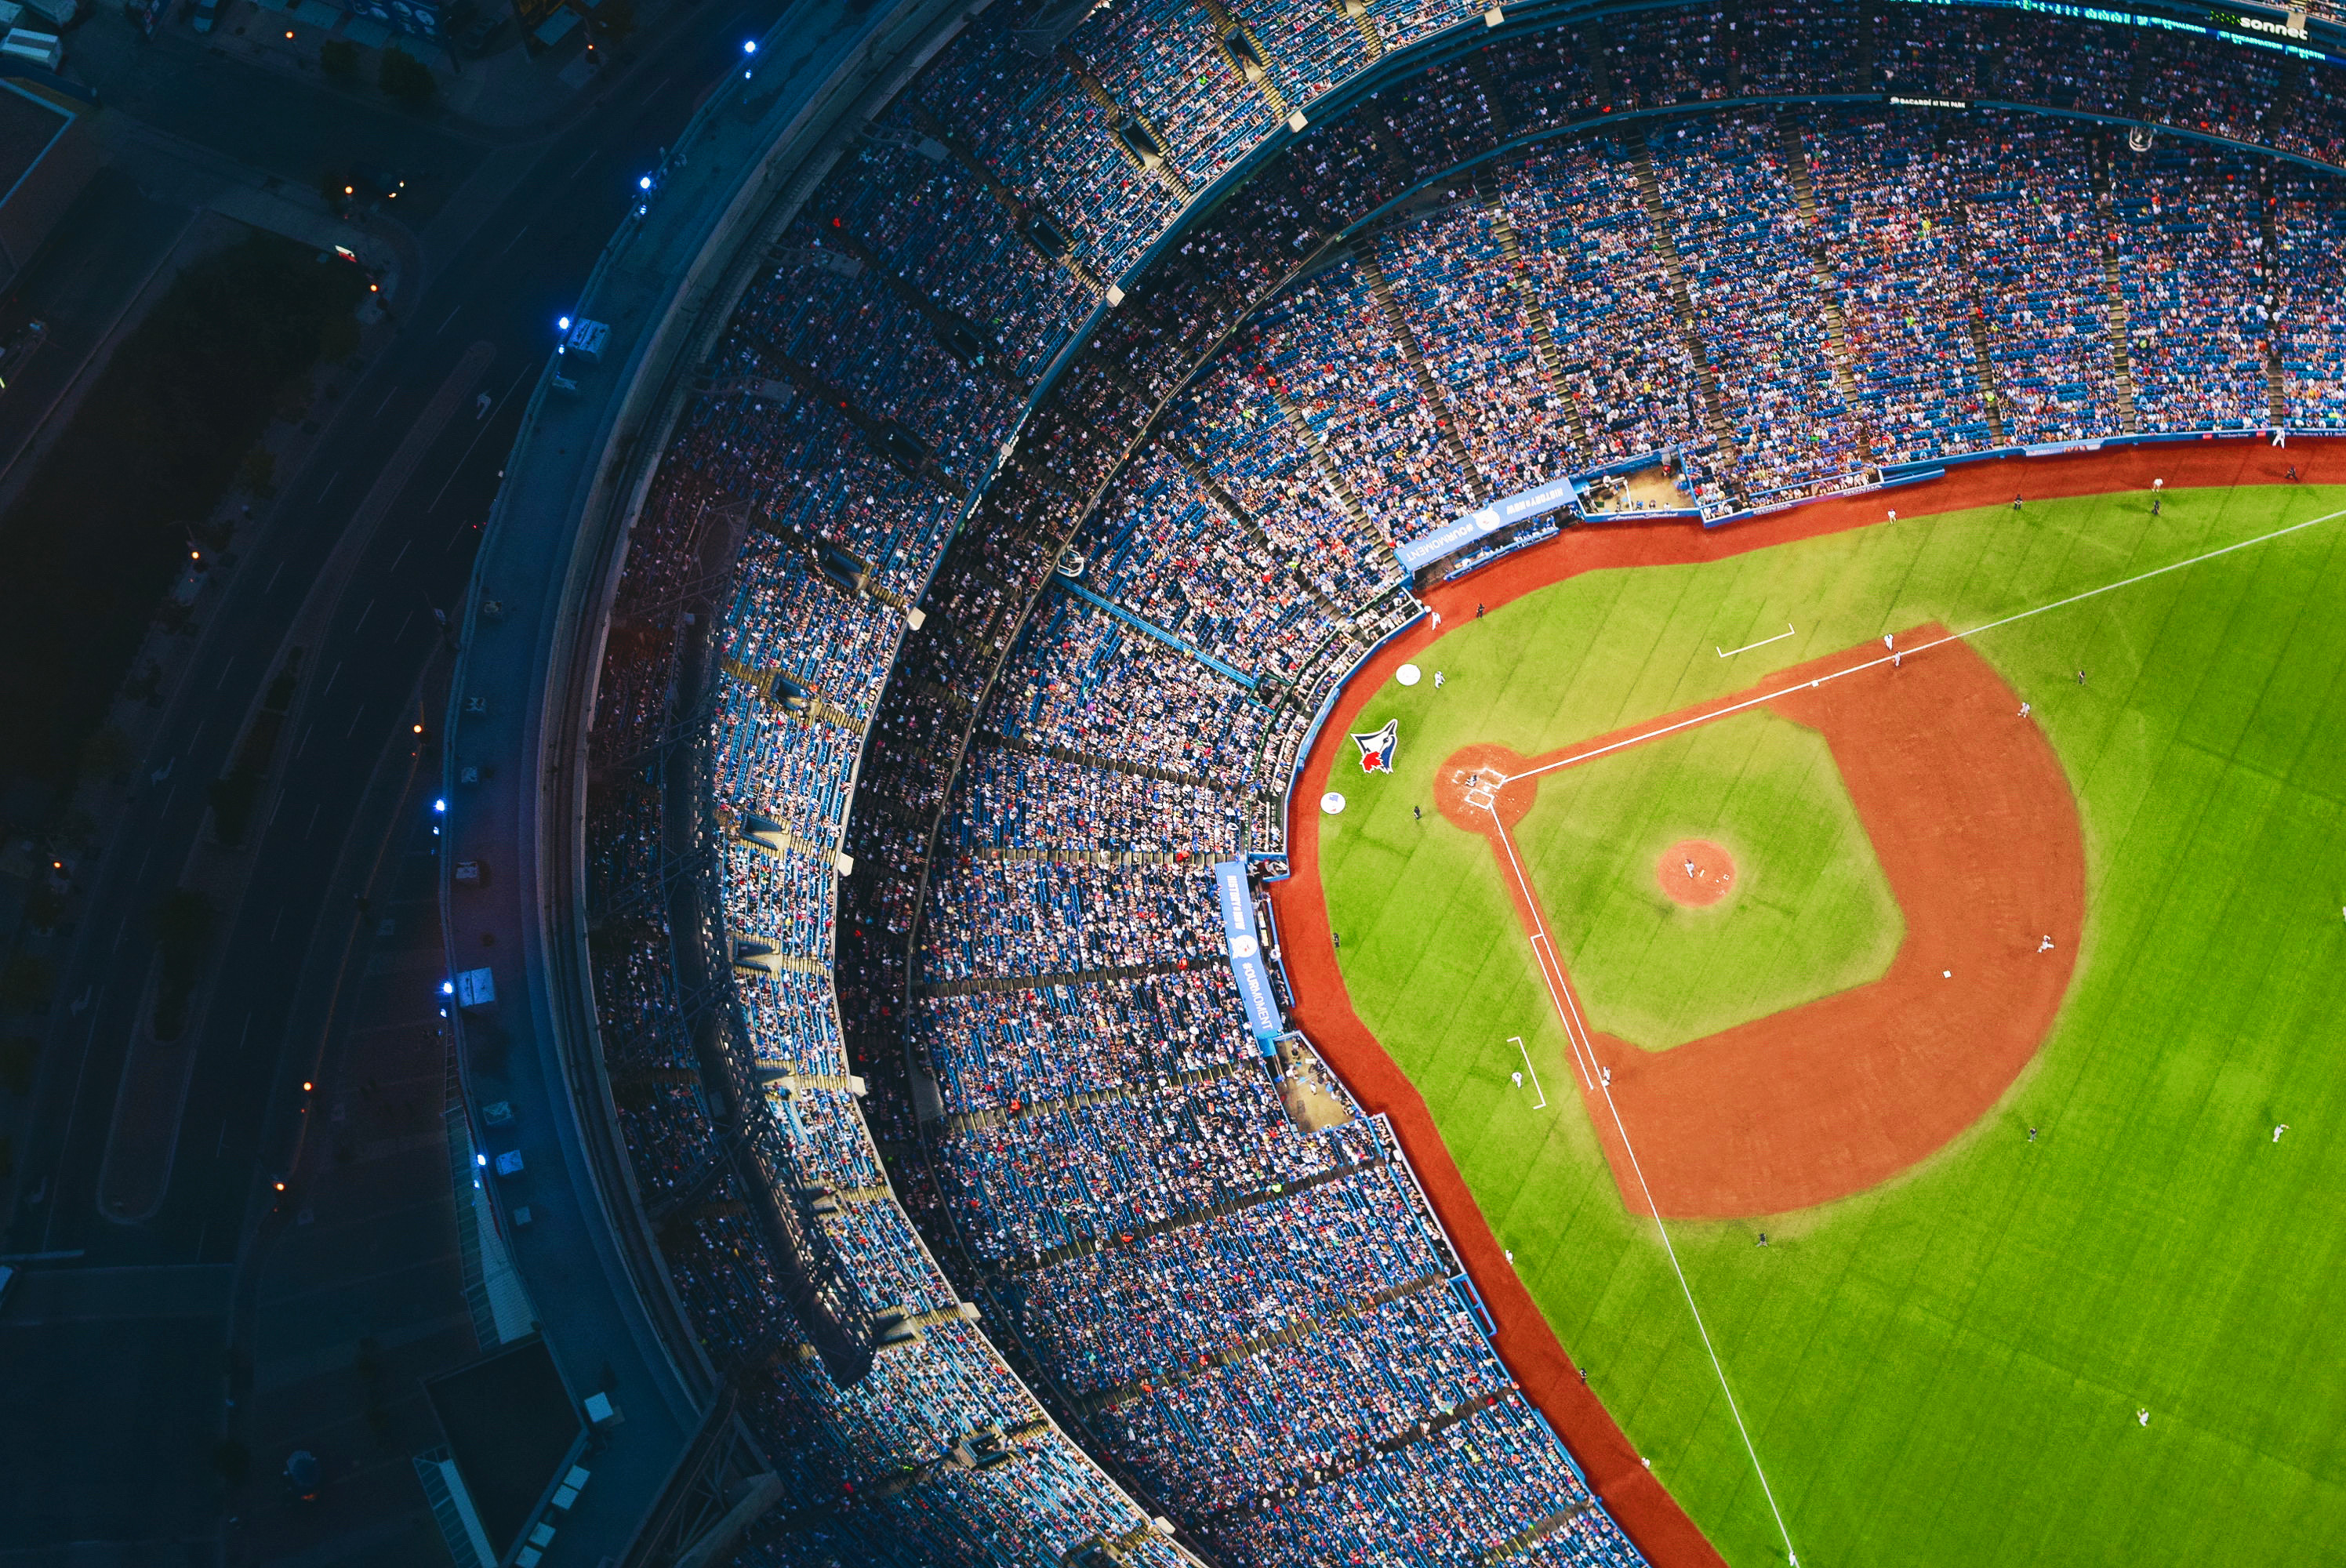 aerial photo of a Blue Jays baseball game diamond in the Toronto Rogers Centre